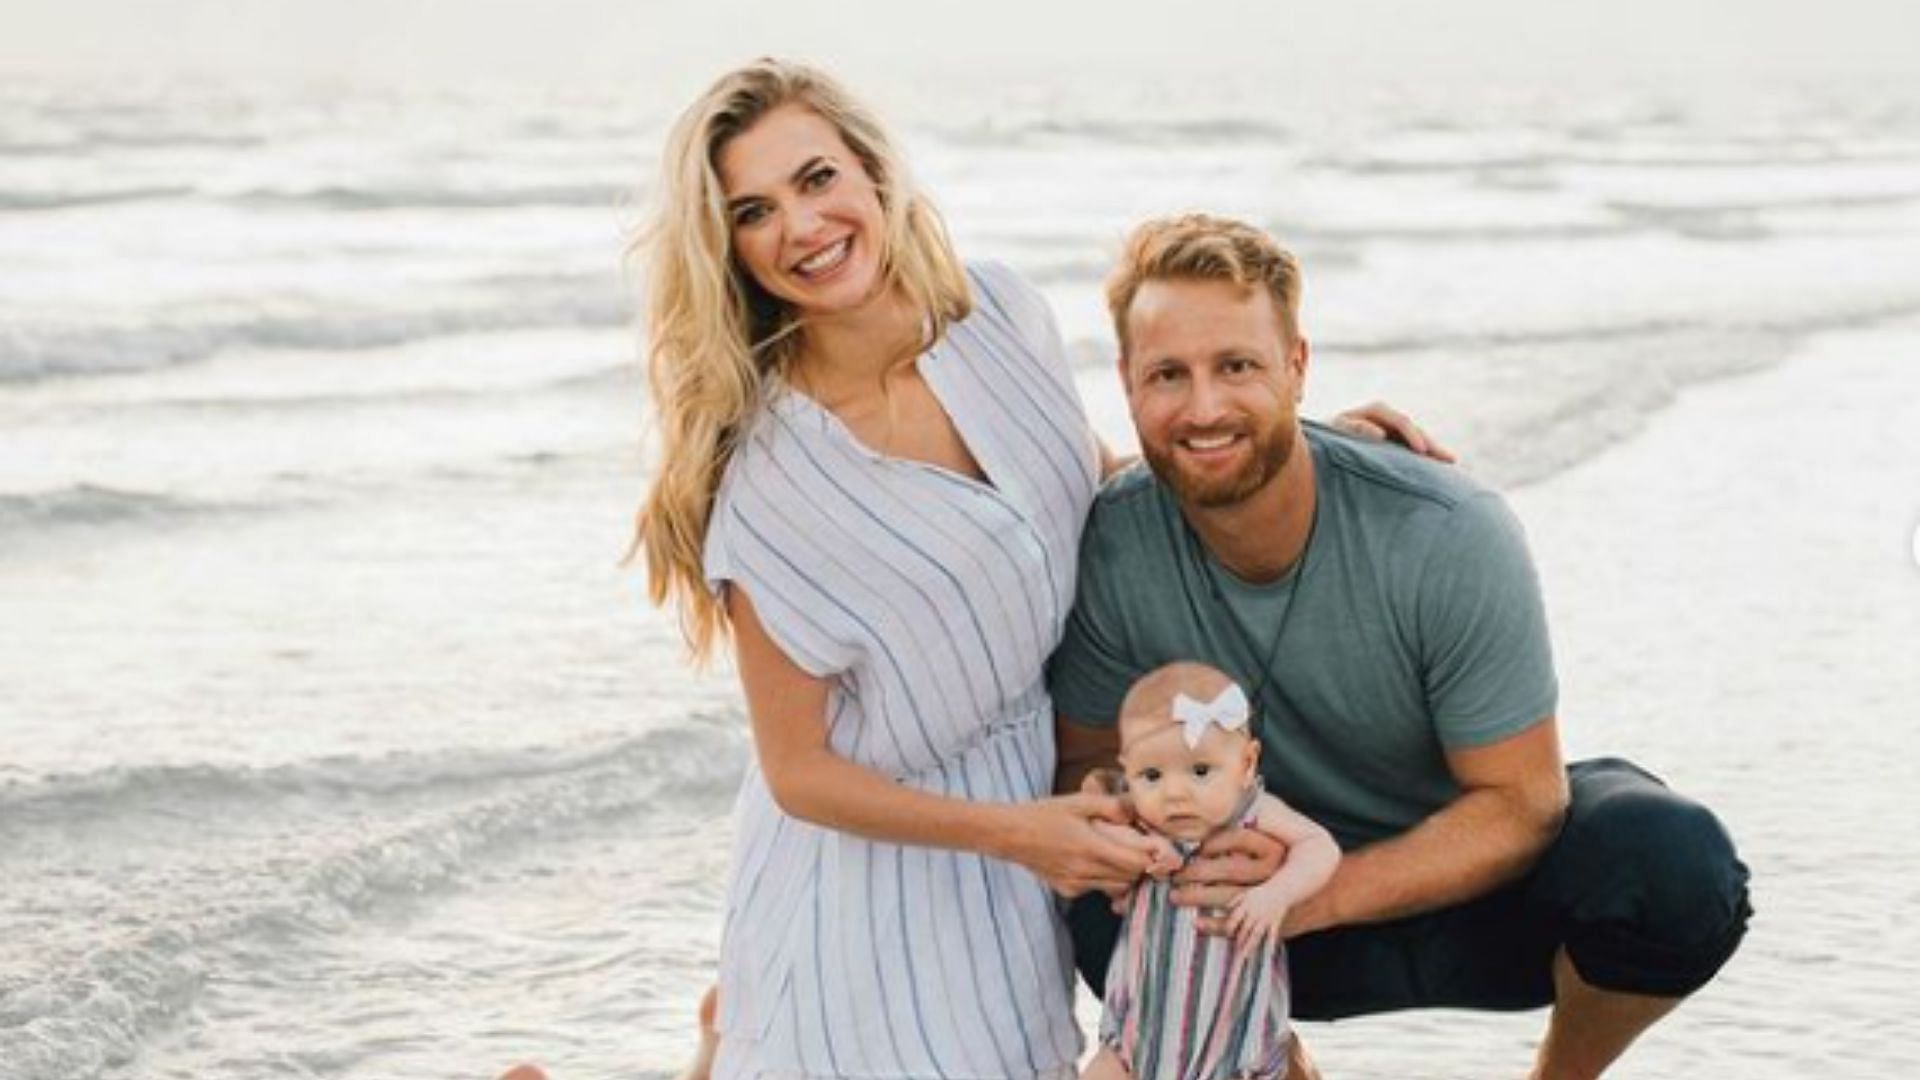 San Francisco Giants pitcher Alex Cobb with his wife, Kelly Cobb.